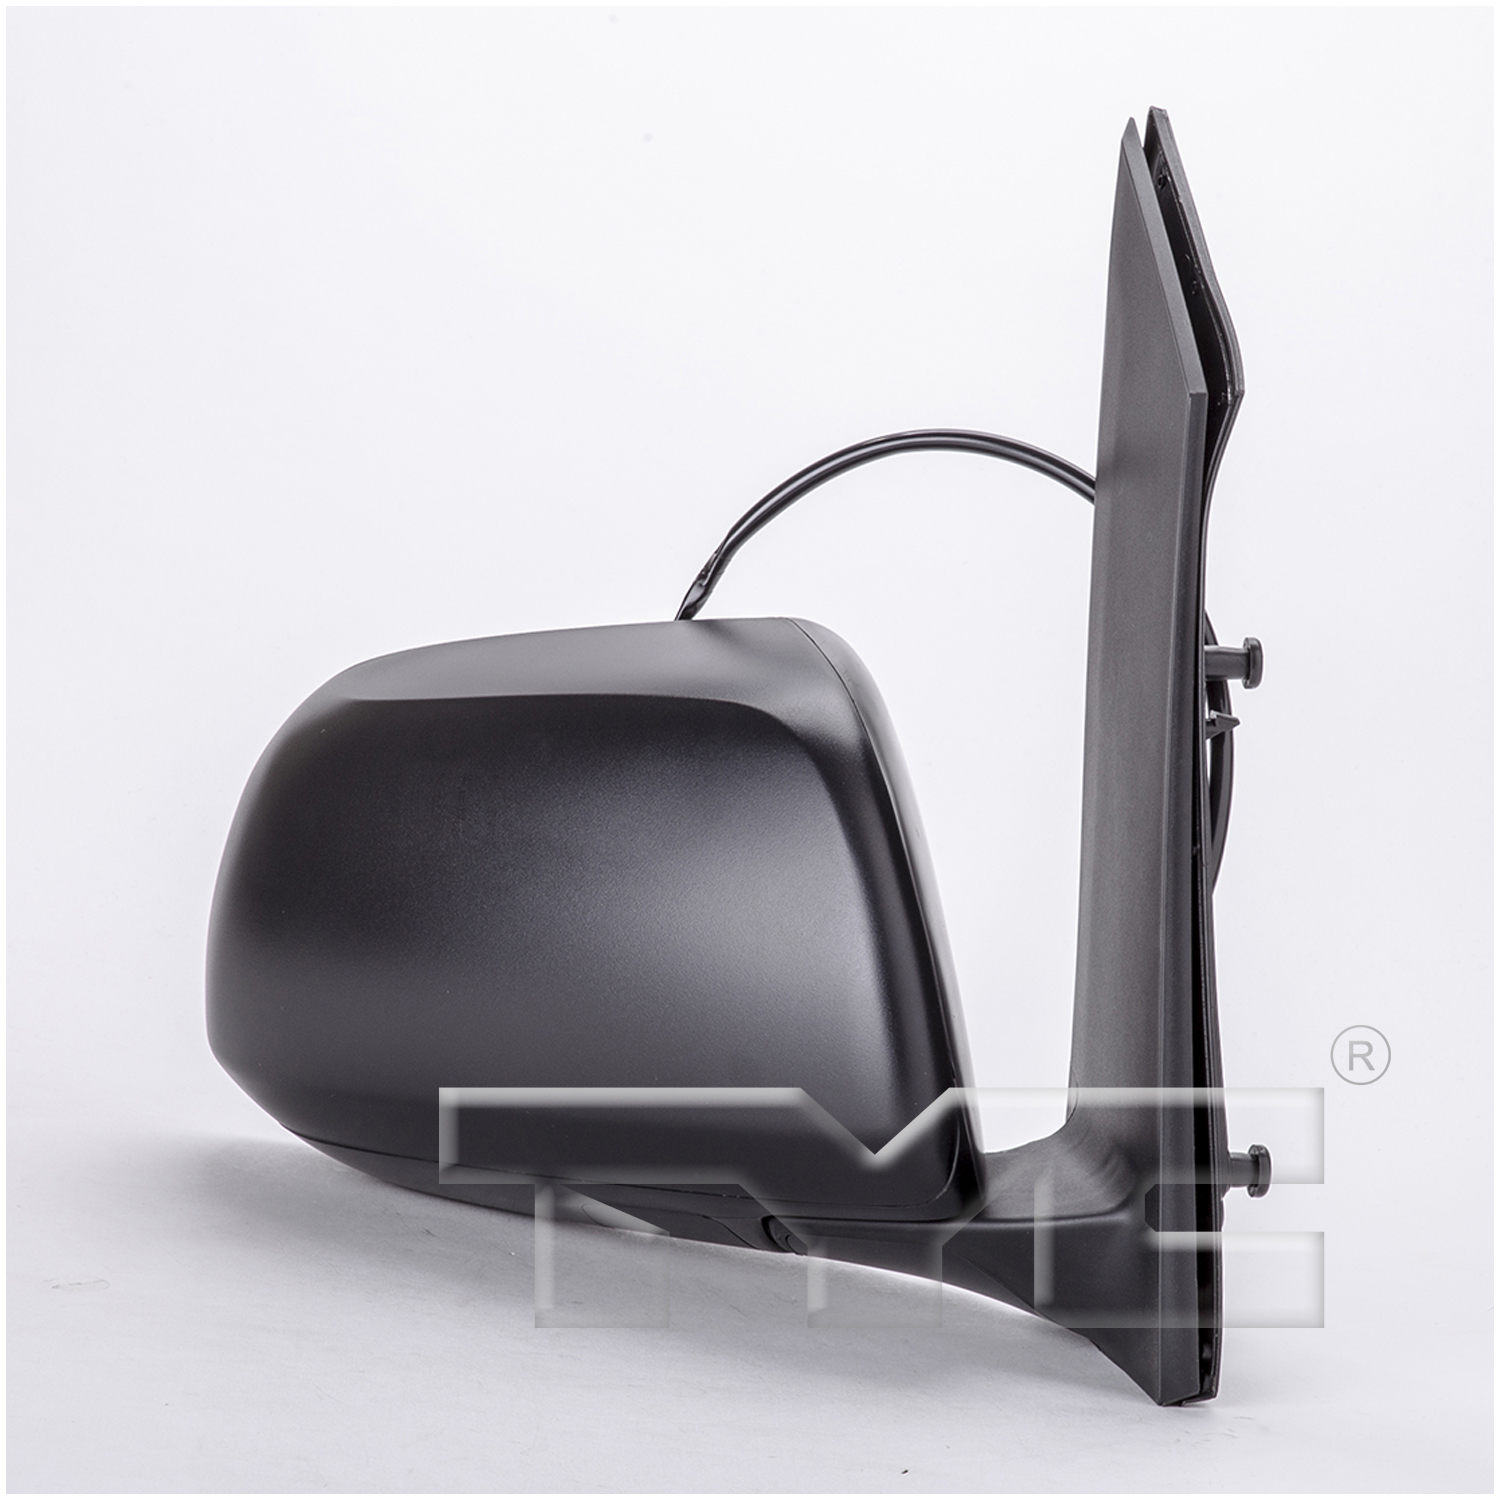 Aftermarket MIRRORS for TOYOTA - SIENNA, SIENNA,11-14,RT Mirror outside rear view